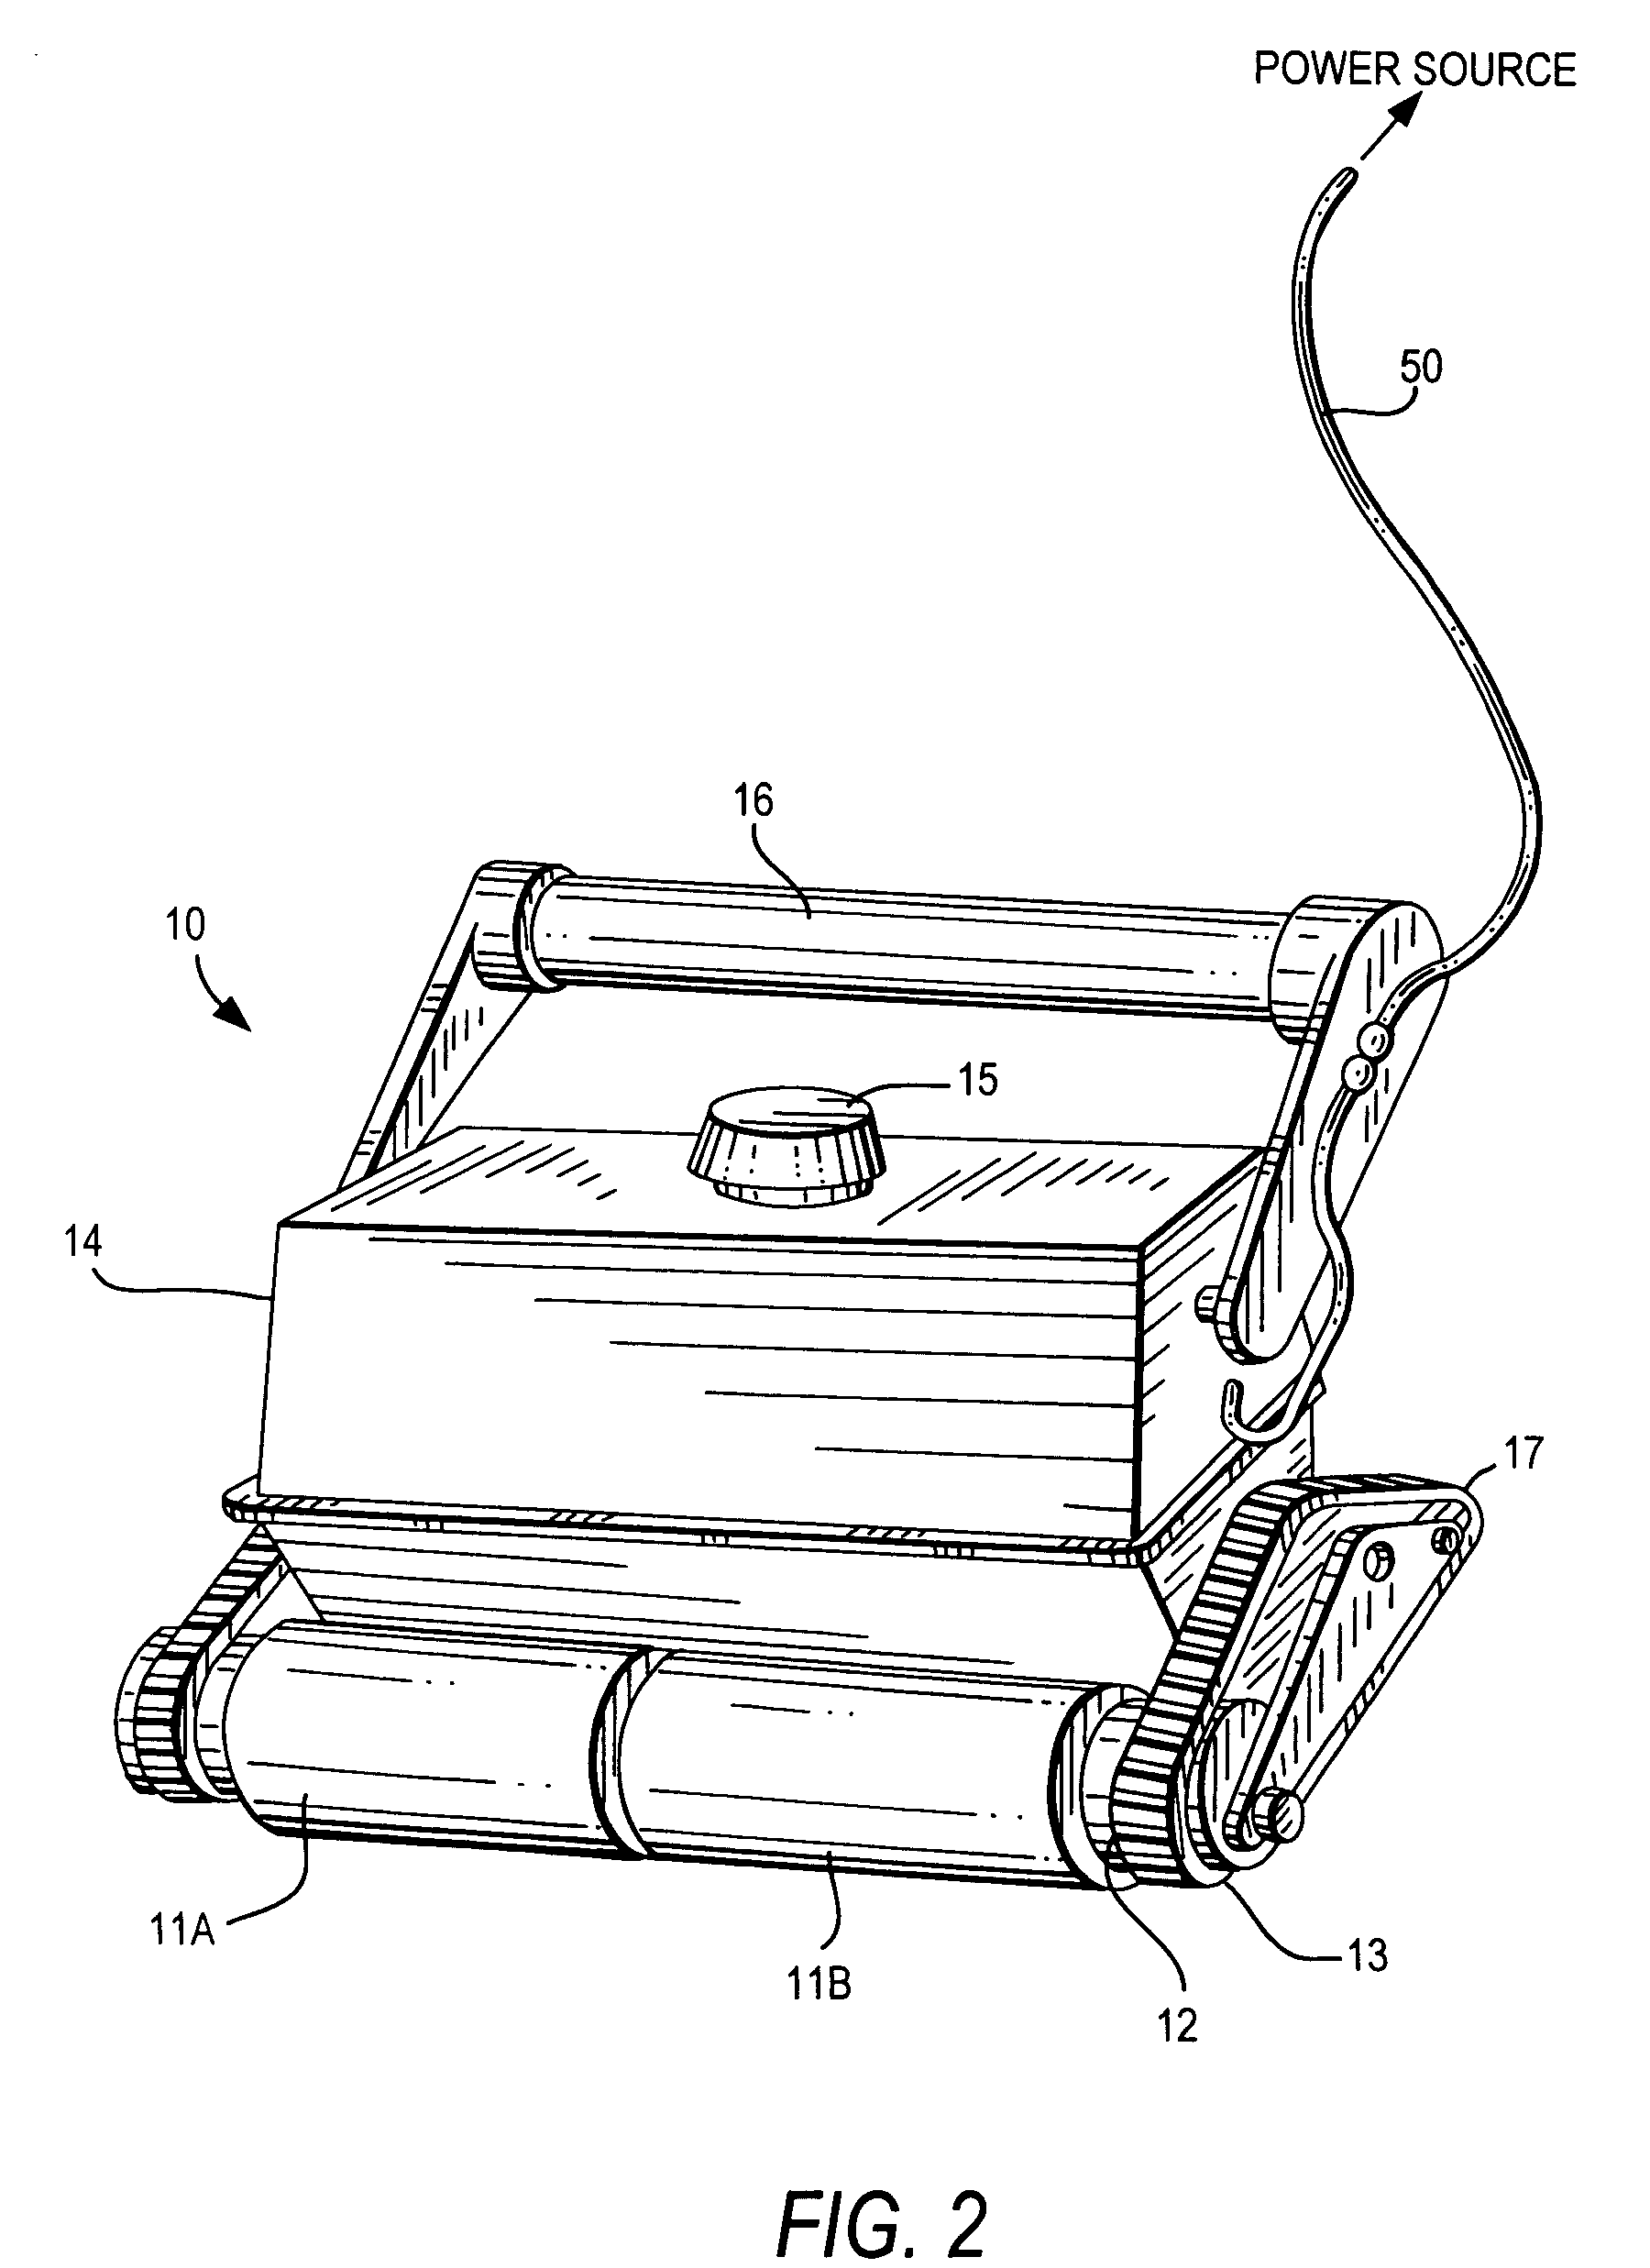 Method for controlling twisting of pool cleaner power cable